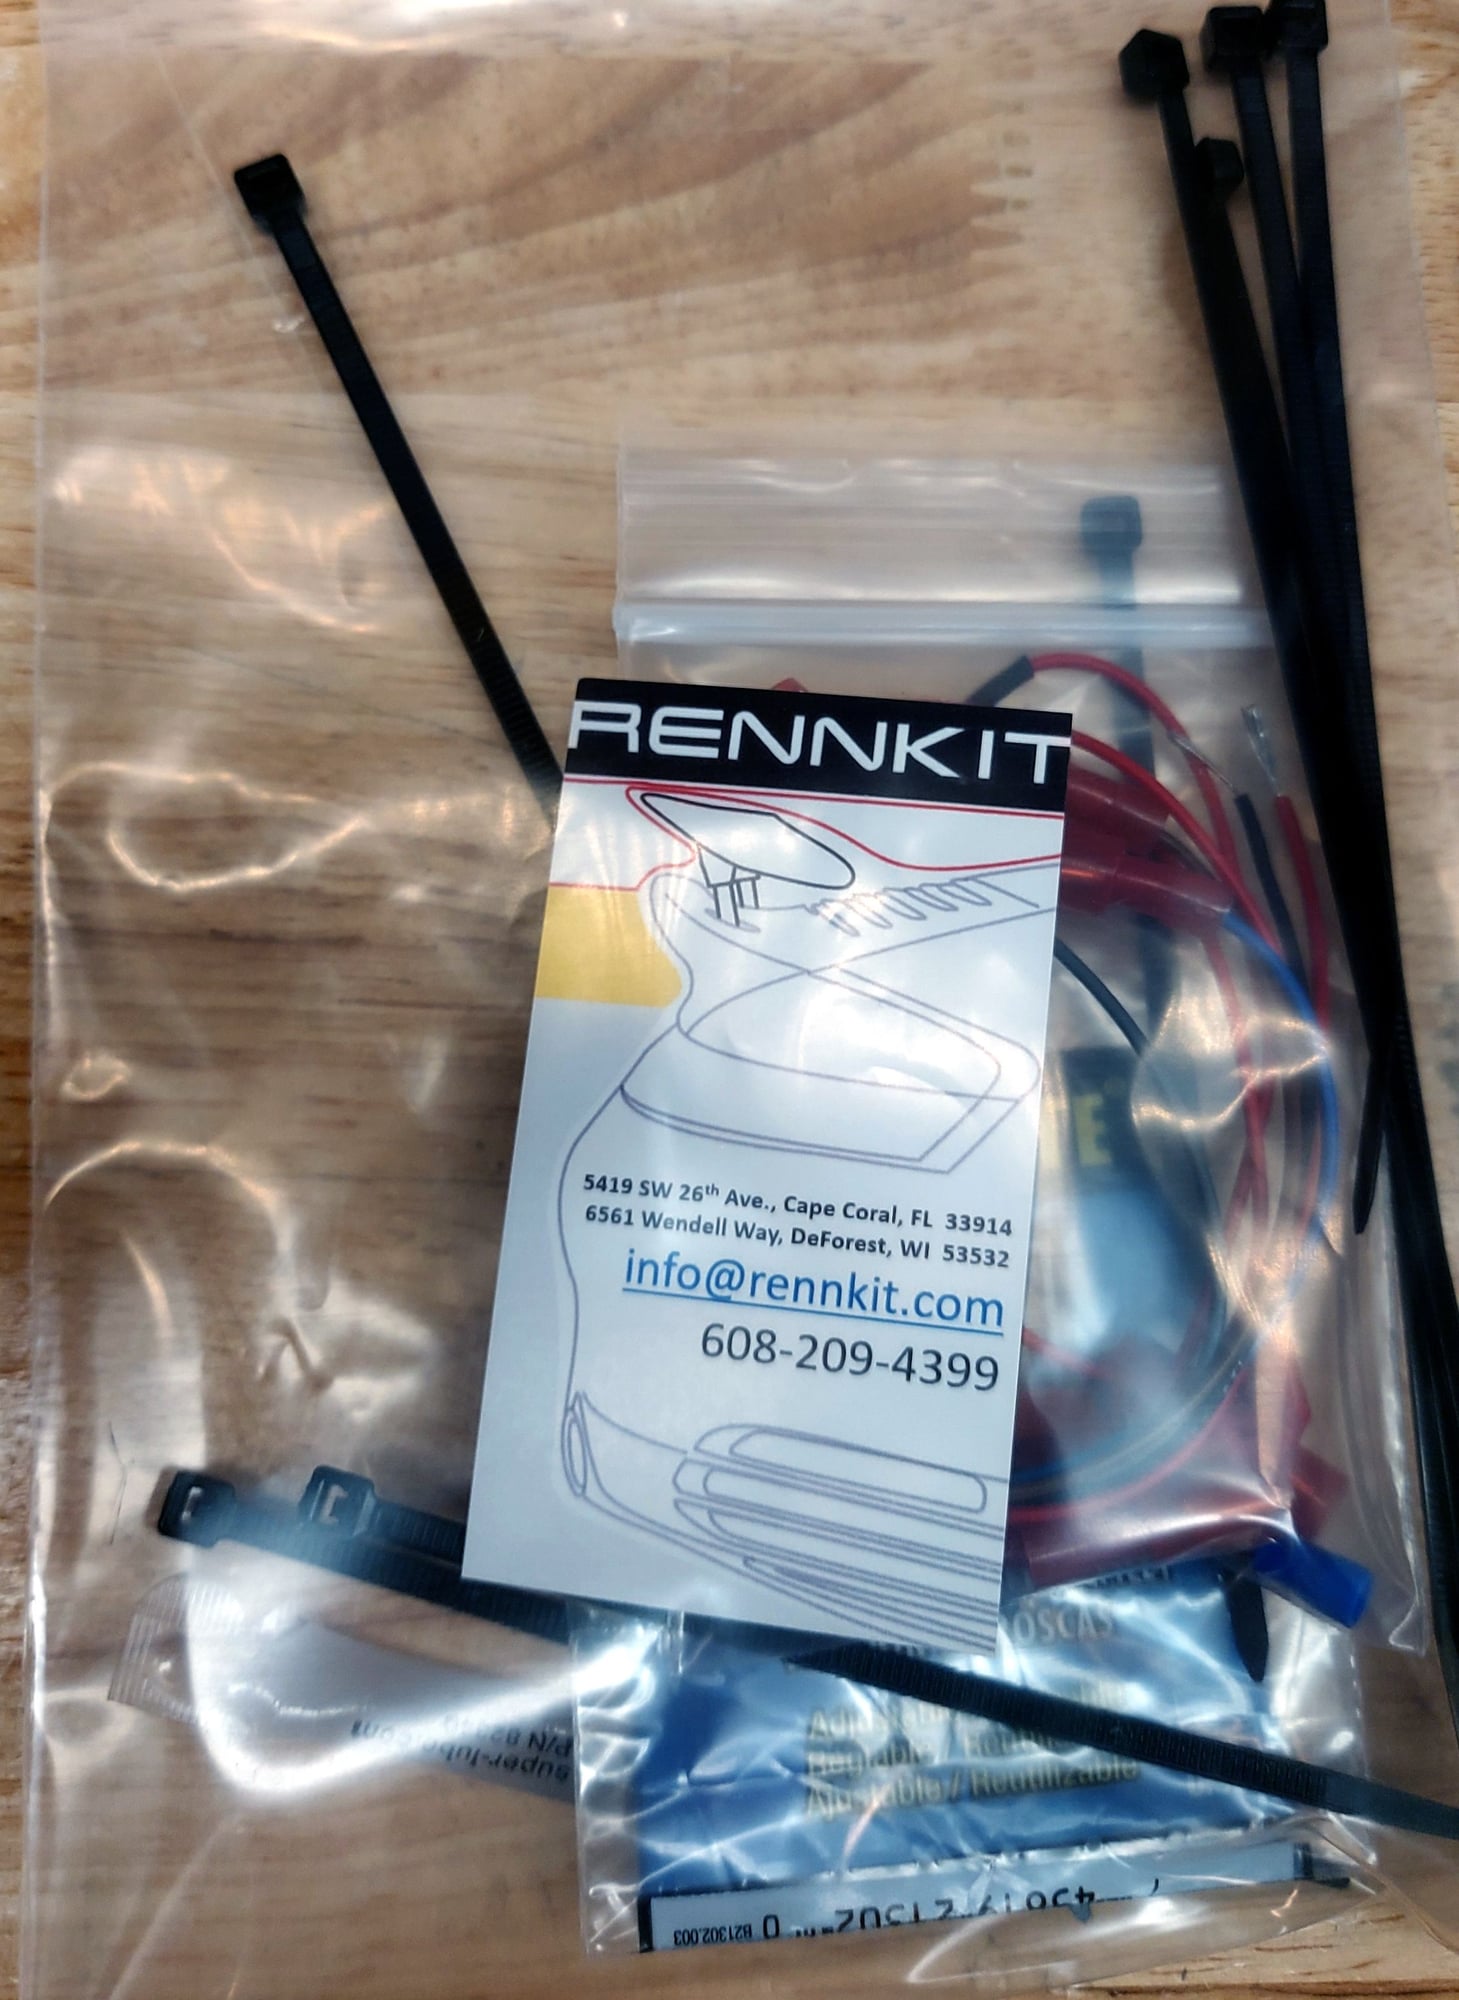 Exterior Body Parts - Rennkit 4" eRam Kit for 996 or 997 Turbo wing - Used - Cape Coral, FL 33914, United States